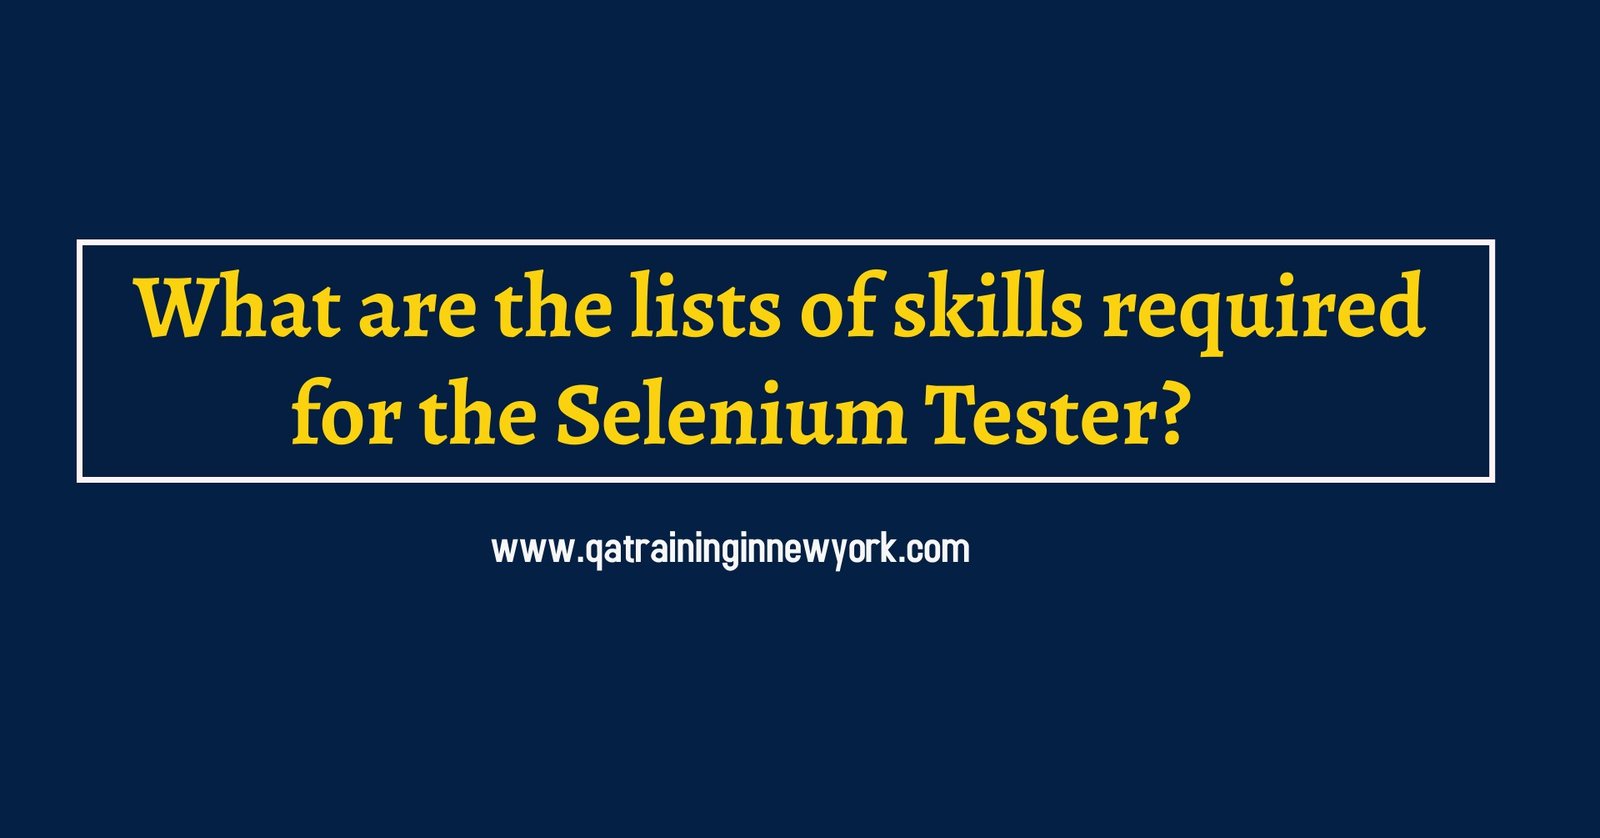 What are the lists of skills required for the Selenium Tester?